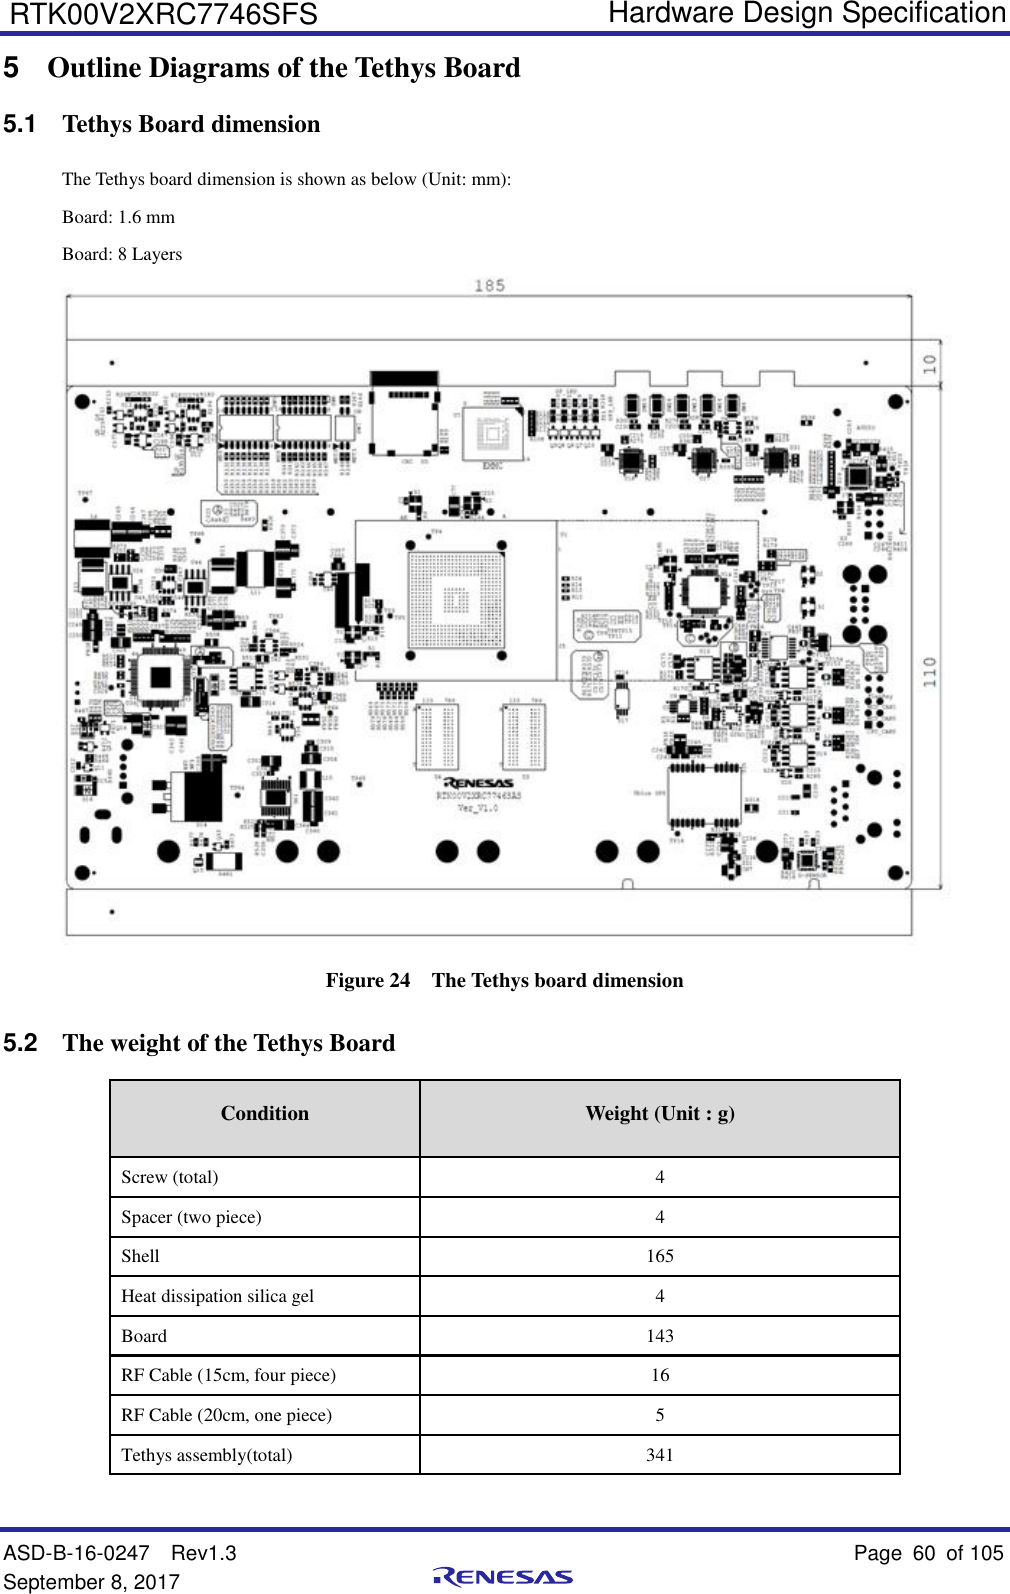   Hardware Design Specification ASD-B-16-0247  Rev1.3    Page 60  of 105 September 8, 2017      RTK00V2XRC7746SFS 5  Outline Diagrams of the Tethys Board 5.1  Tethys Board dimension The Tethys board dimension is shown as below (Unit: mm):   Board: 1.6 mm Board: 8 Layers  Figure 24  The Tethys board dimension 5.2  The weight of the Tethys Board   Condition Weight (Unit : g) Screw (total) 4 Spacer (two piece) 4 Shell 165 Heat dissipation silica gel 4 Board 143 RF Cable (15cm, four piece) 16 RF Cable (20cm, one piece) 5 Tethys assembly(total) 341  